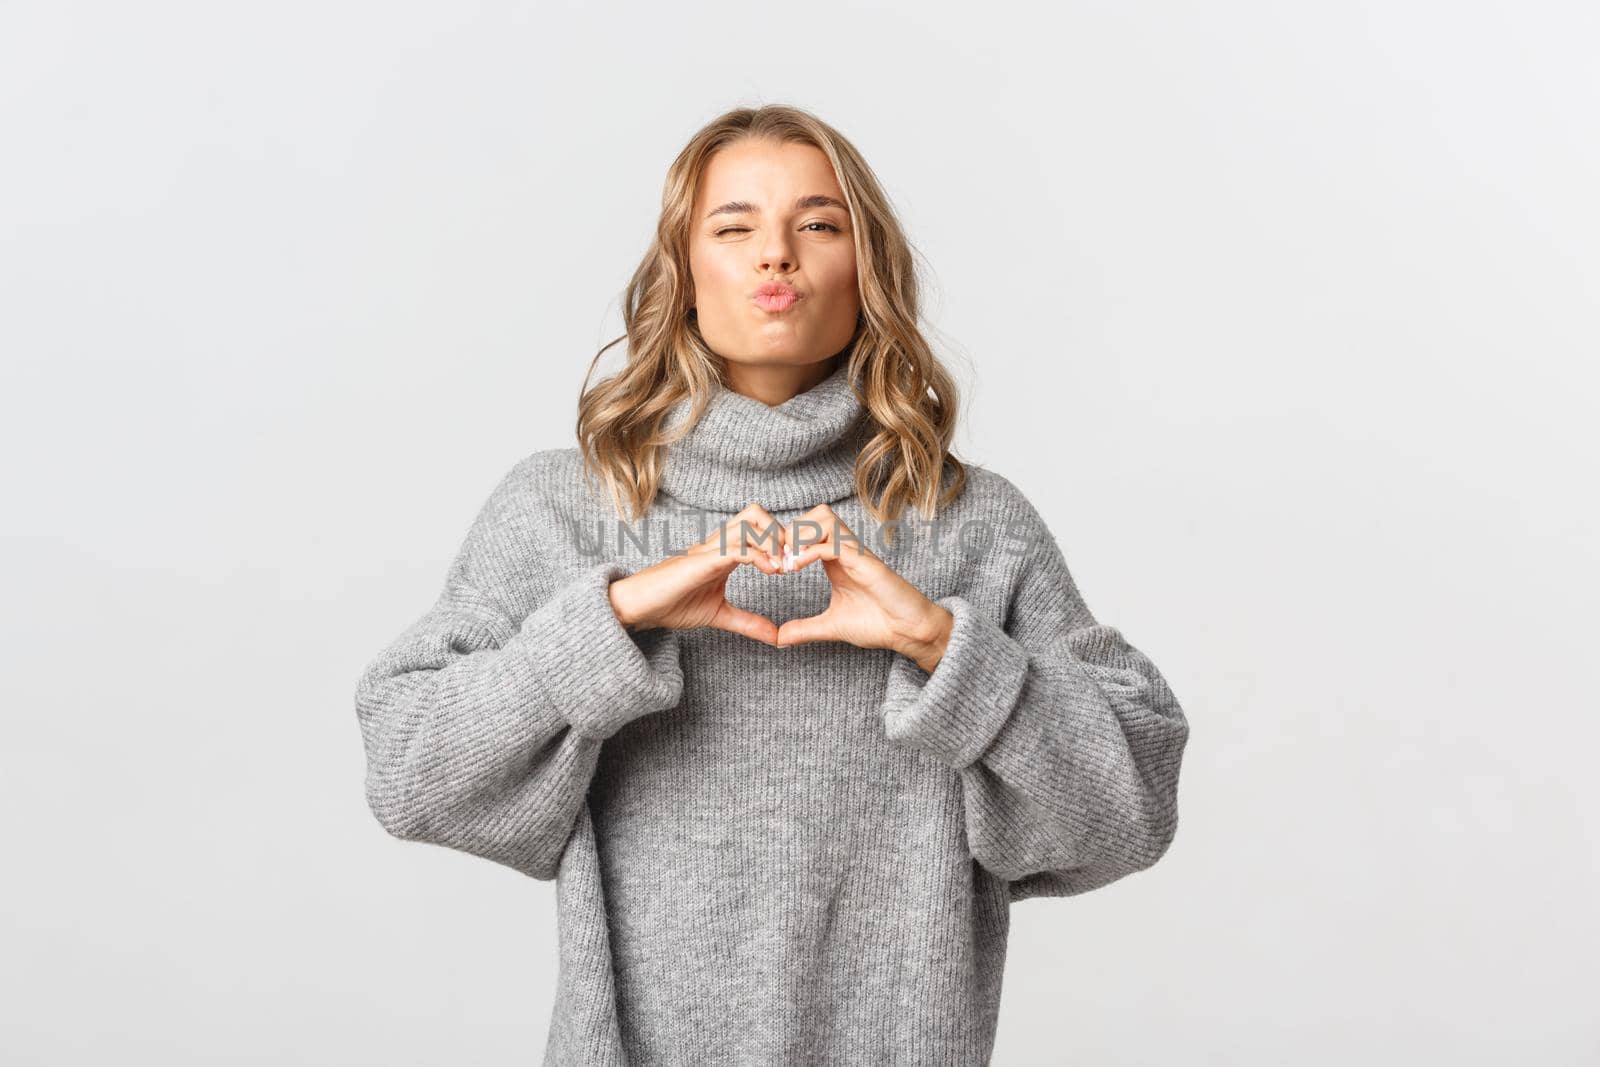 Image of attractive tender girl in grey sweater, confess in love, showing heart sign and waiting for kiss with eyes closed, standing over white background.